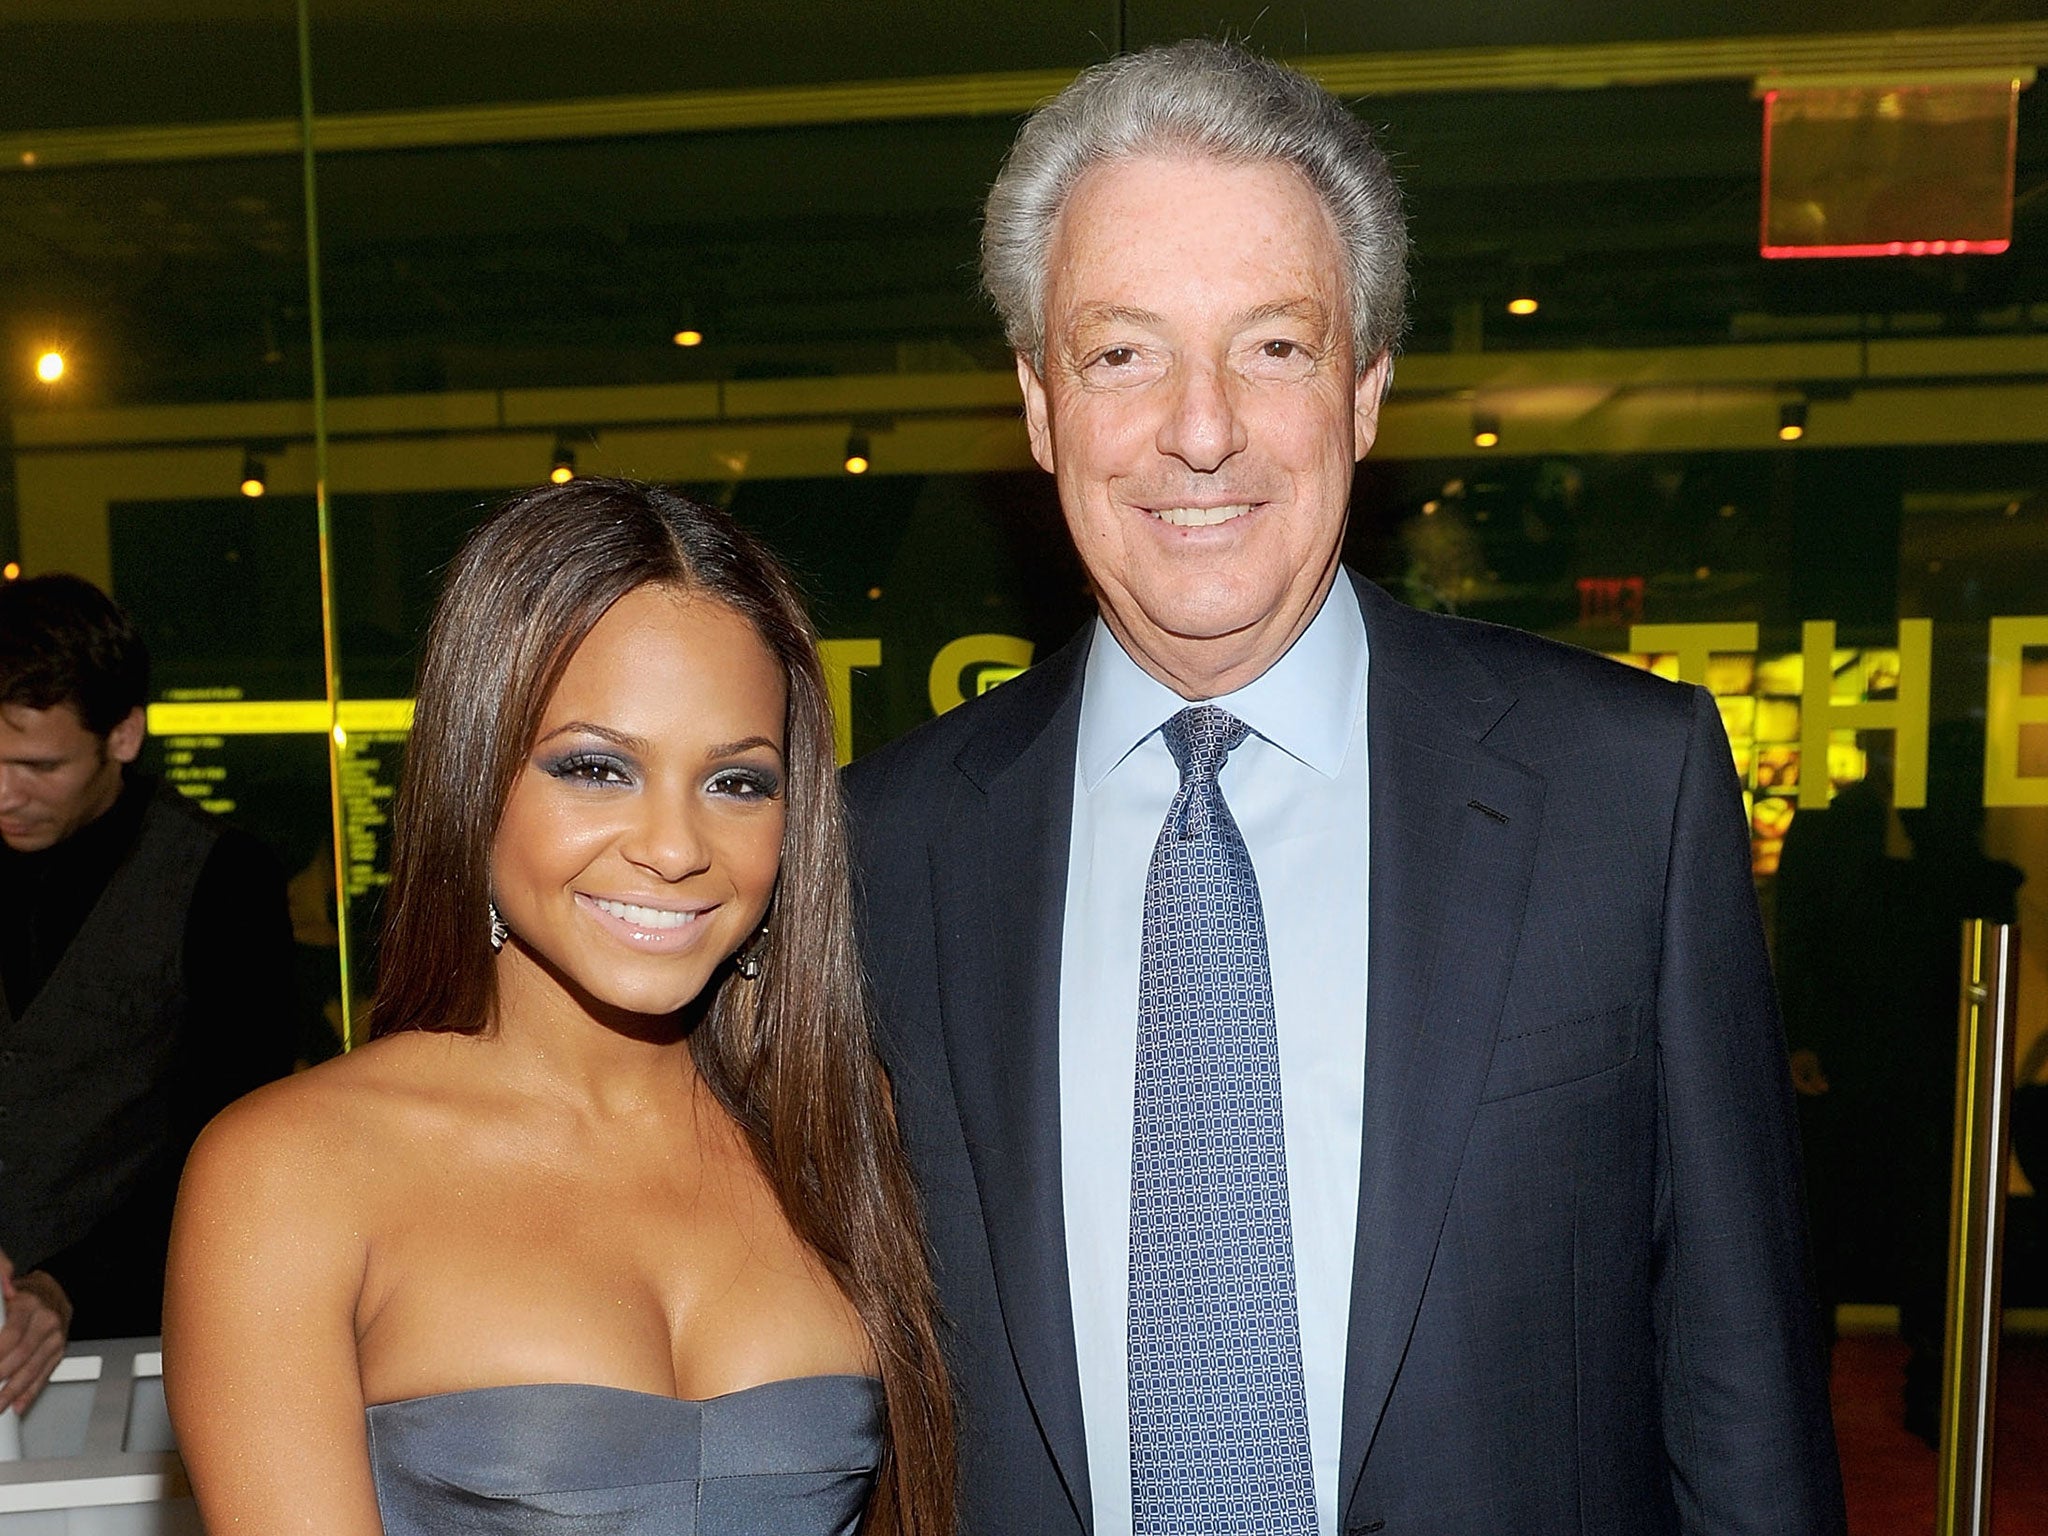 Michael Roth (pictured with pop star Christina Millian in 2011) still runs the ship at IPG